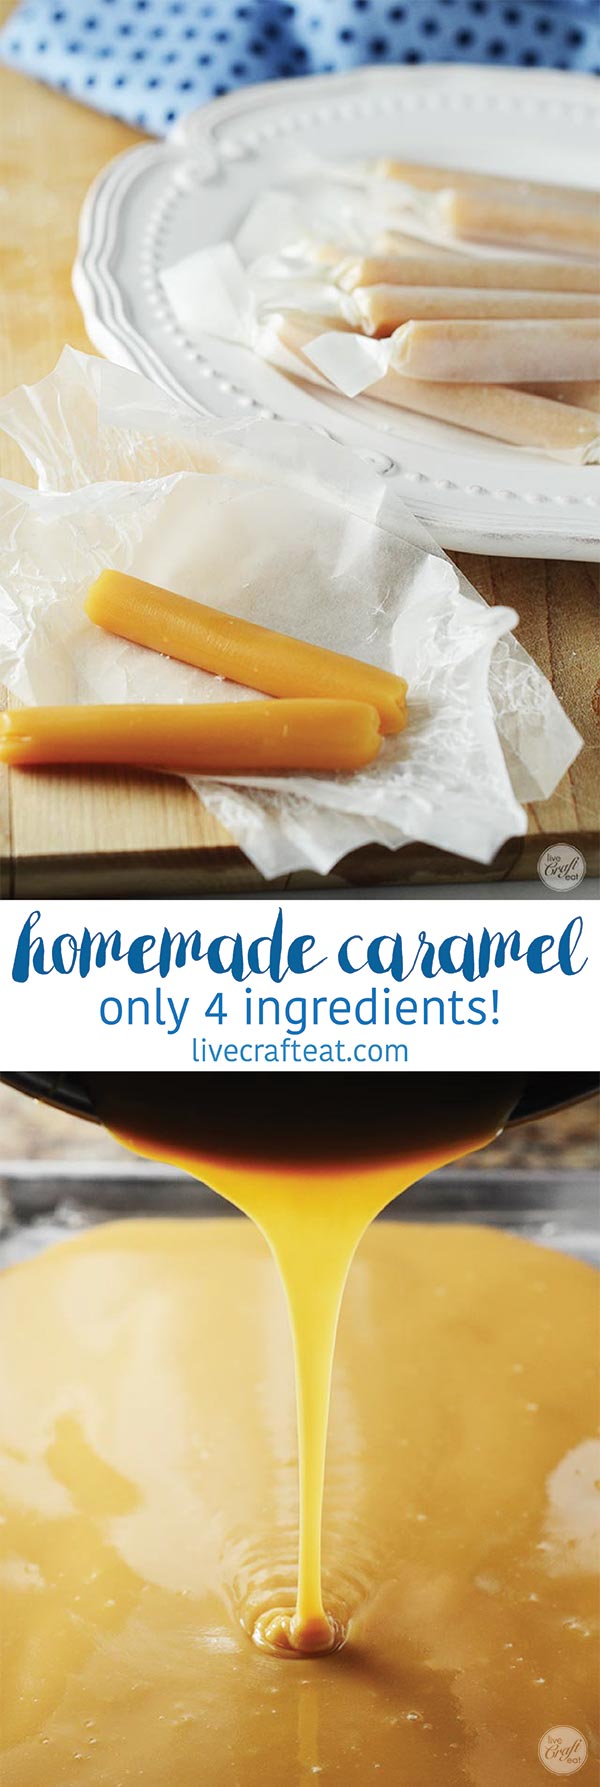 how to make the most delicious, soft, chewy caramels using only 4 ingredients! these are so great to have on hand around the holidays for making several recipes that use caramel + they are great for neighbor/teacher/co-worker gifts!!